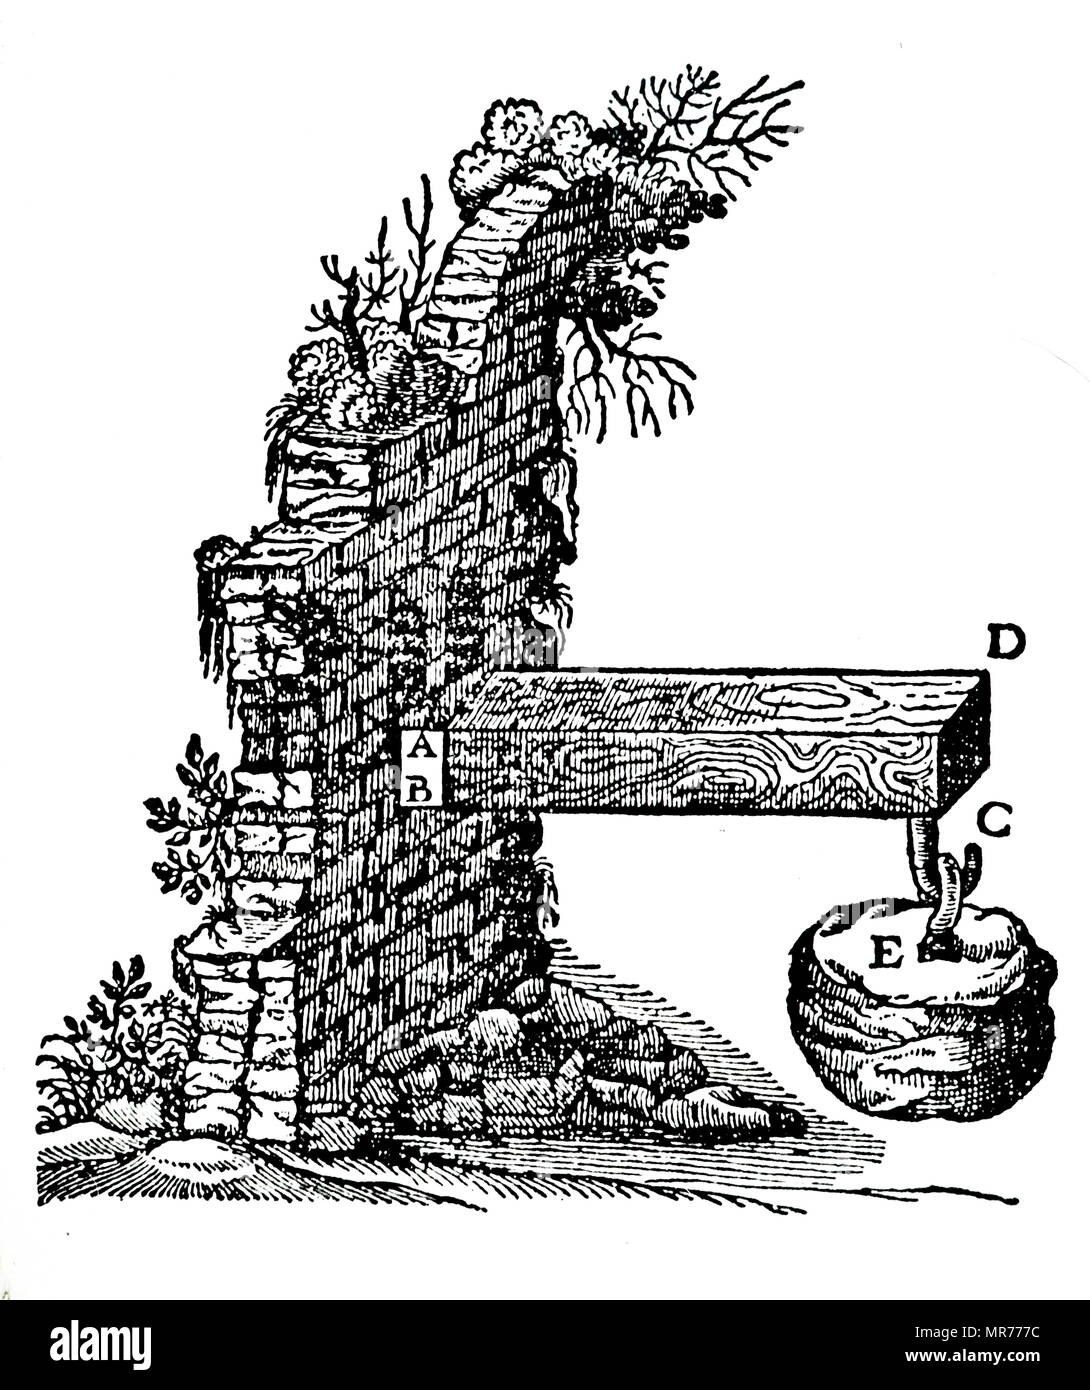 Diagram illustrating how the breaking point of a beam depends upon the material, thickness (A,B), and the leverage exerted by the weight E, at varying distances (in this case at D,C), along the beam. Dated 17th century Stock Photo